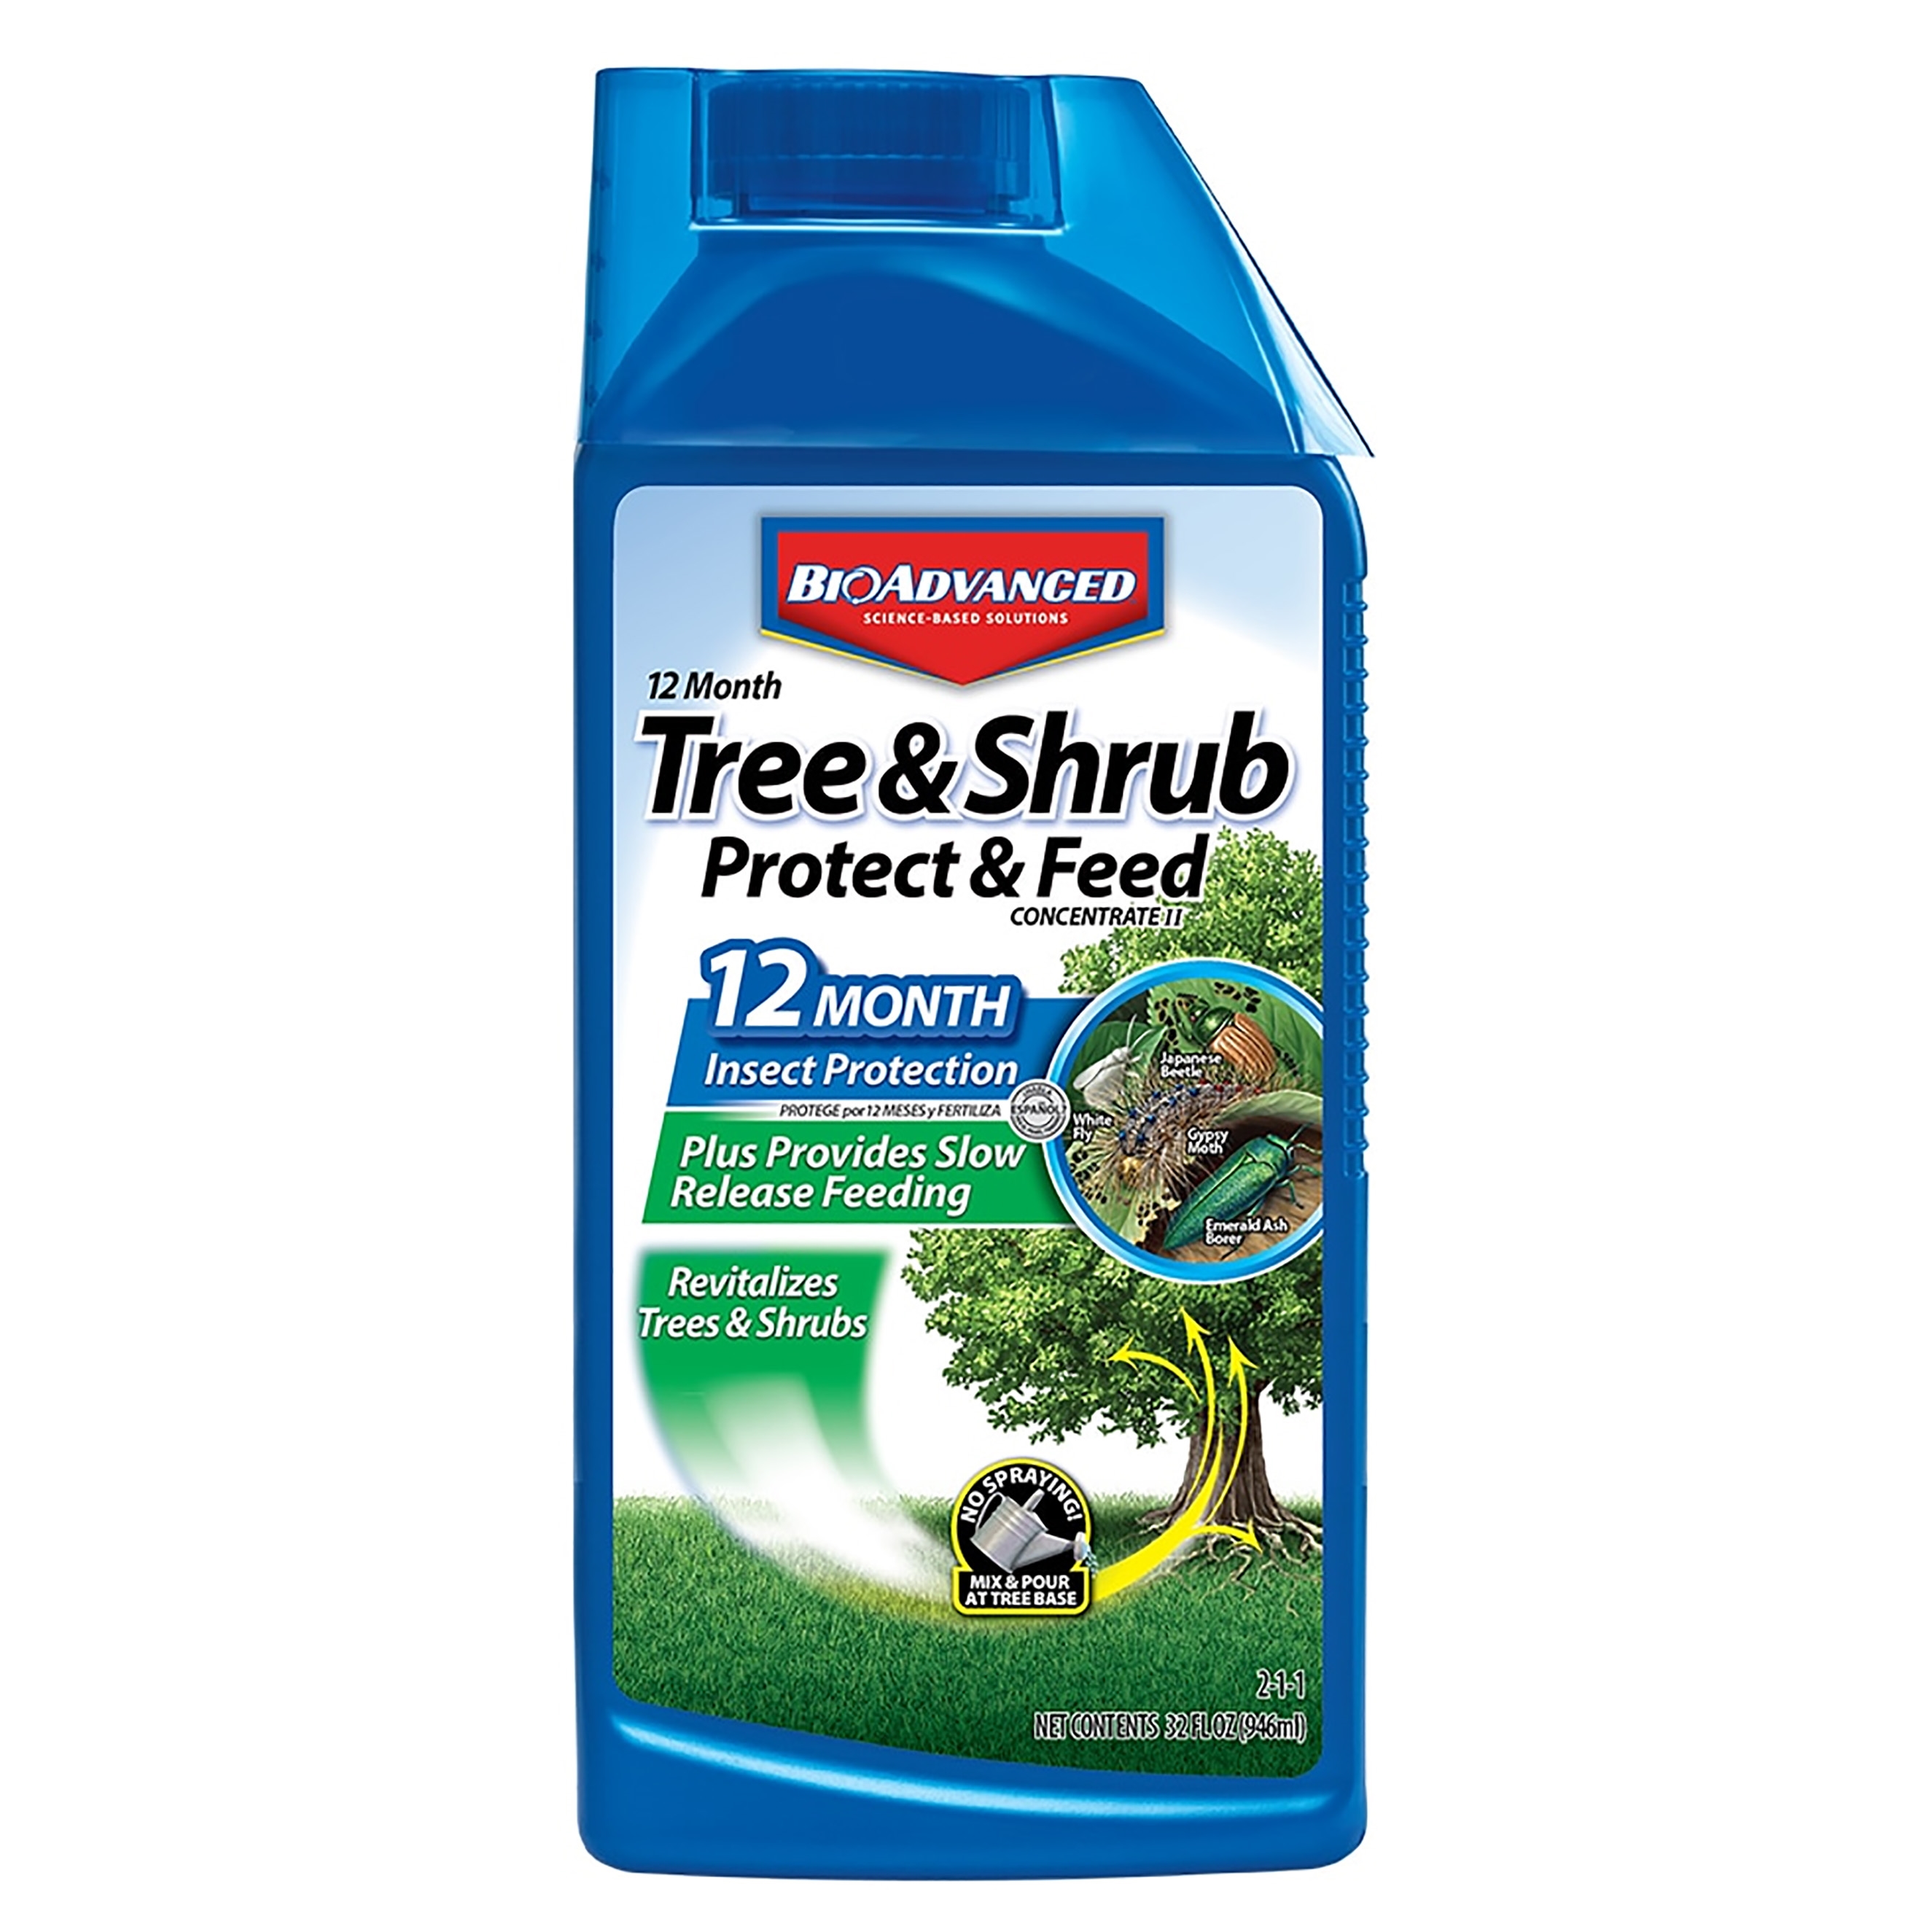 701810A Concentrated Tree and Shrub Protect and Feed II, Liquid, Green, 32 oz Bottle